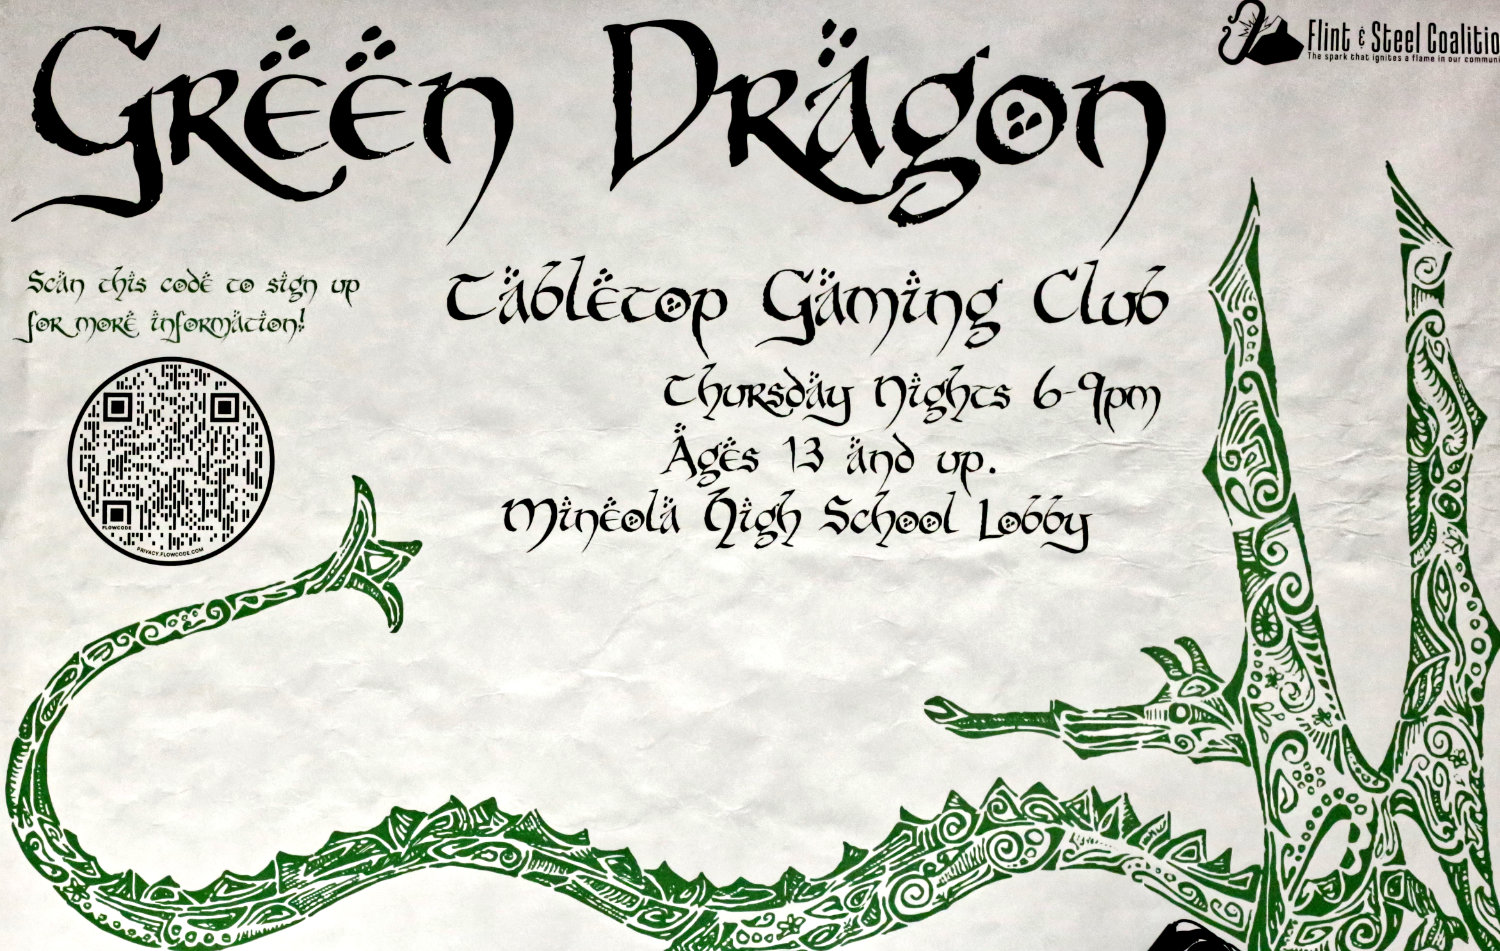 The Green Dragon Gaming Club has found a home at Mineola high school.